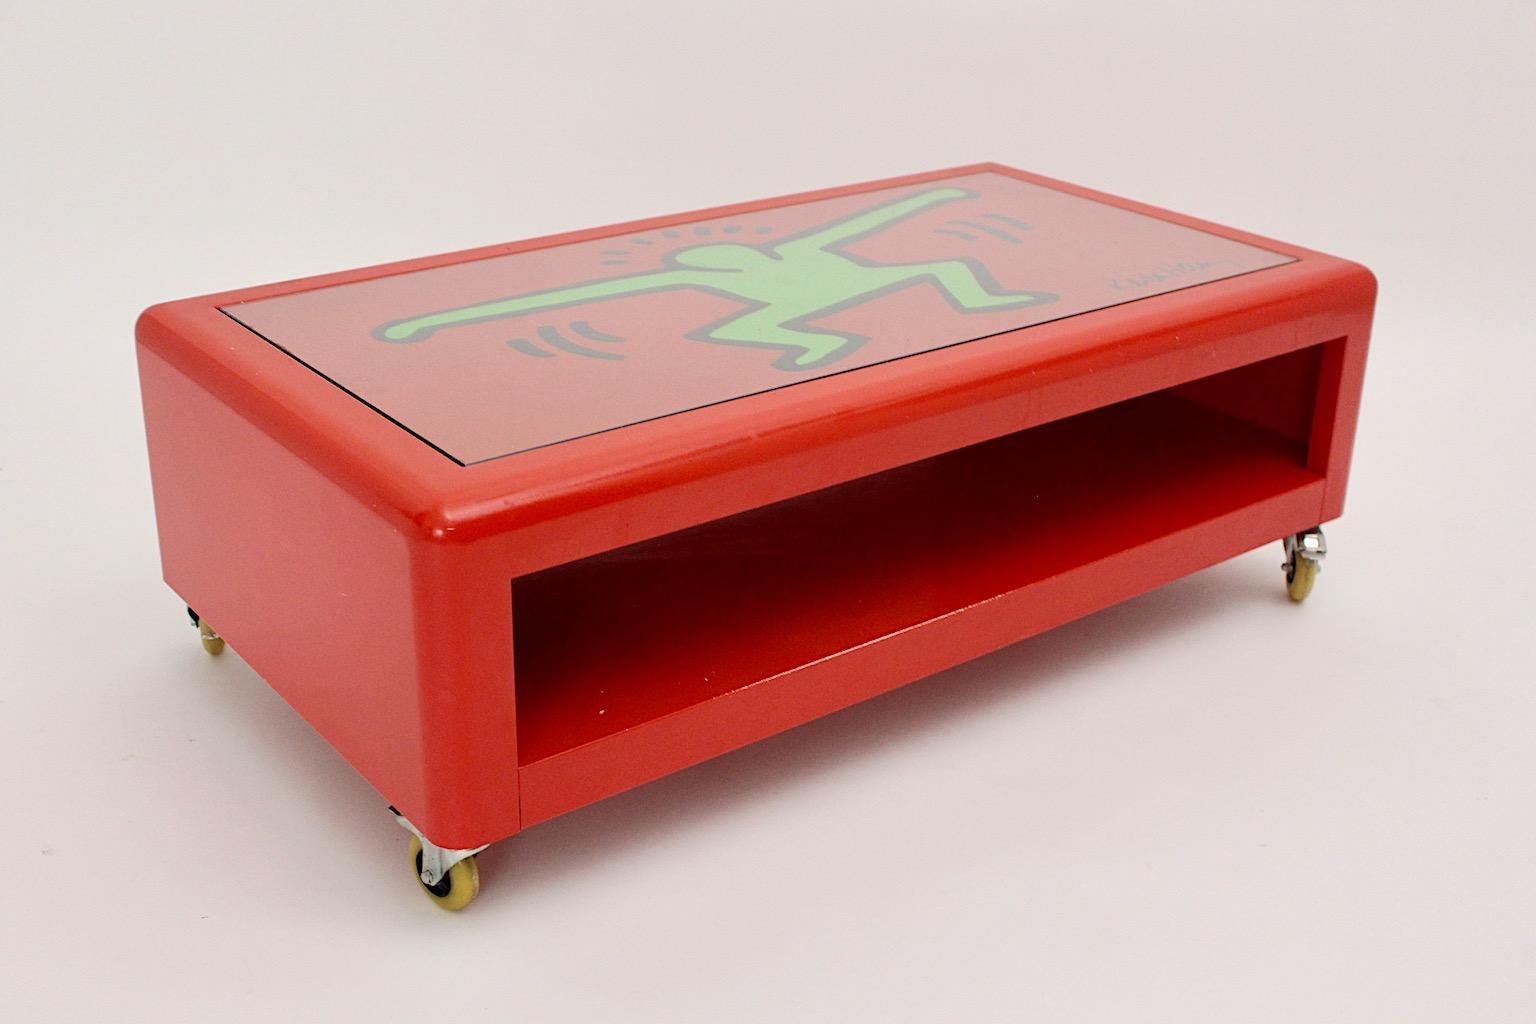 Keith Haring 'After' Low Pop Art Sofa Table Red Metal Bretz 1998 Germany For Sale 3